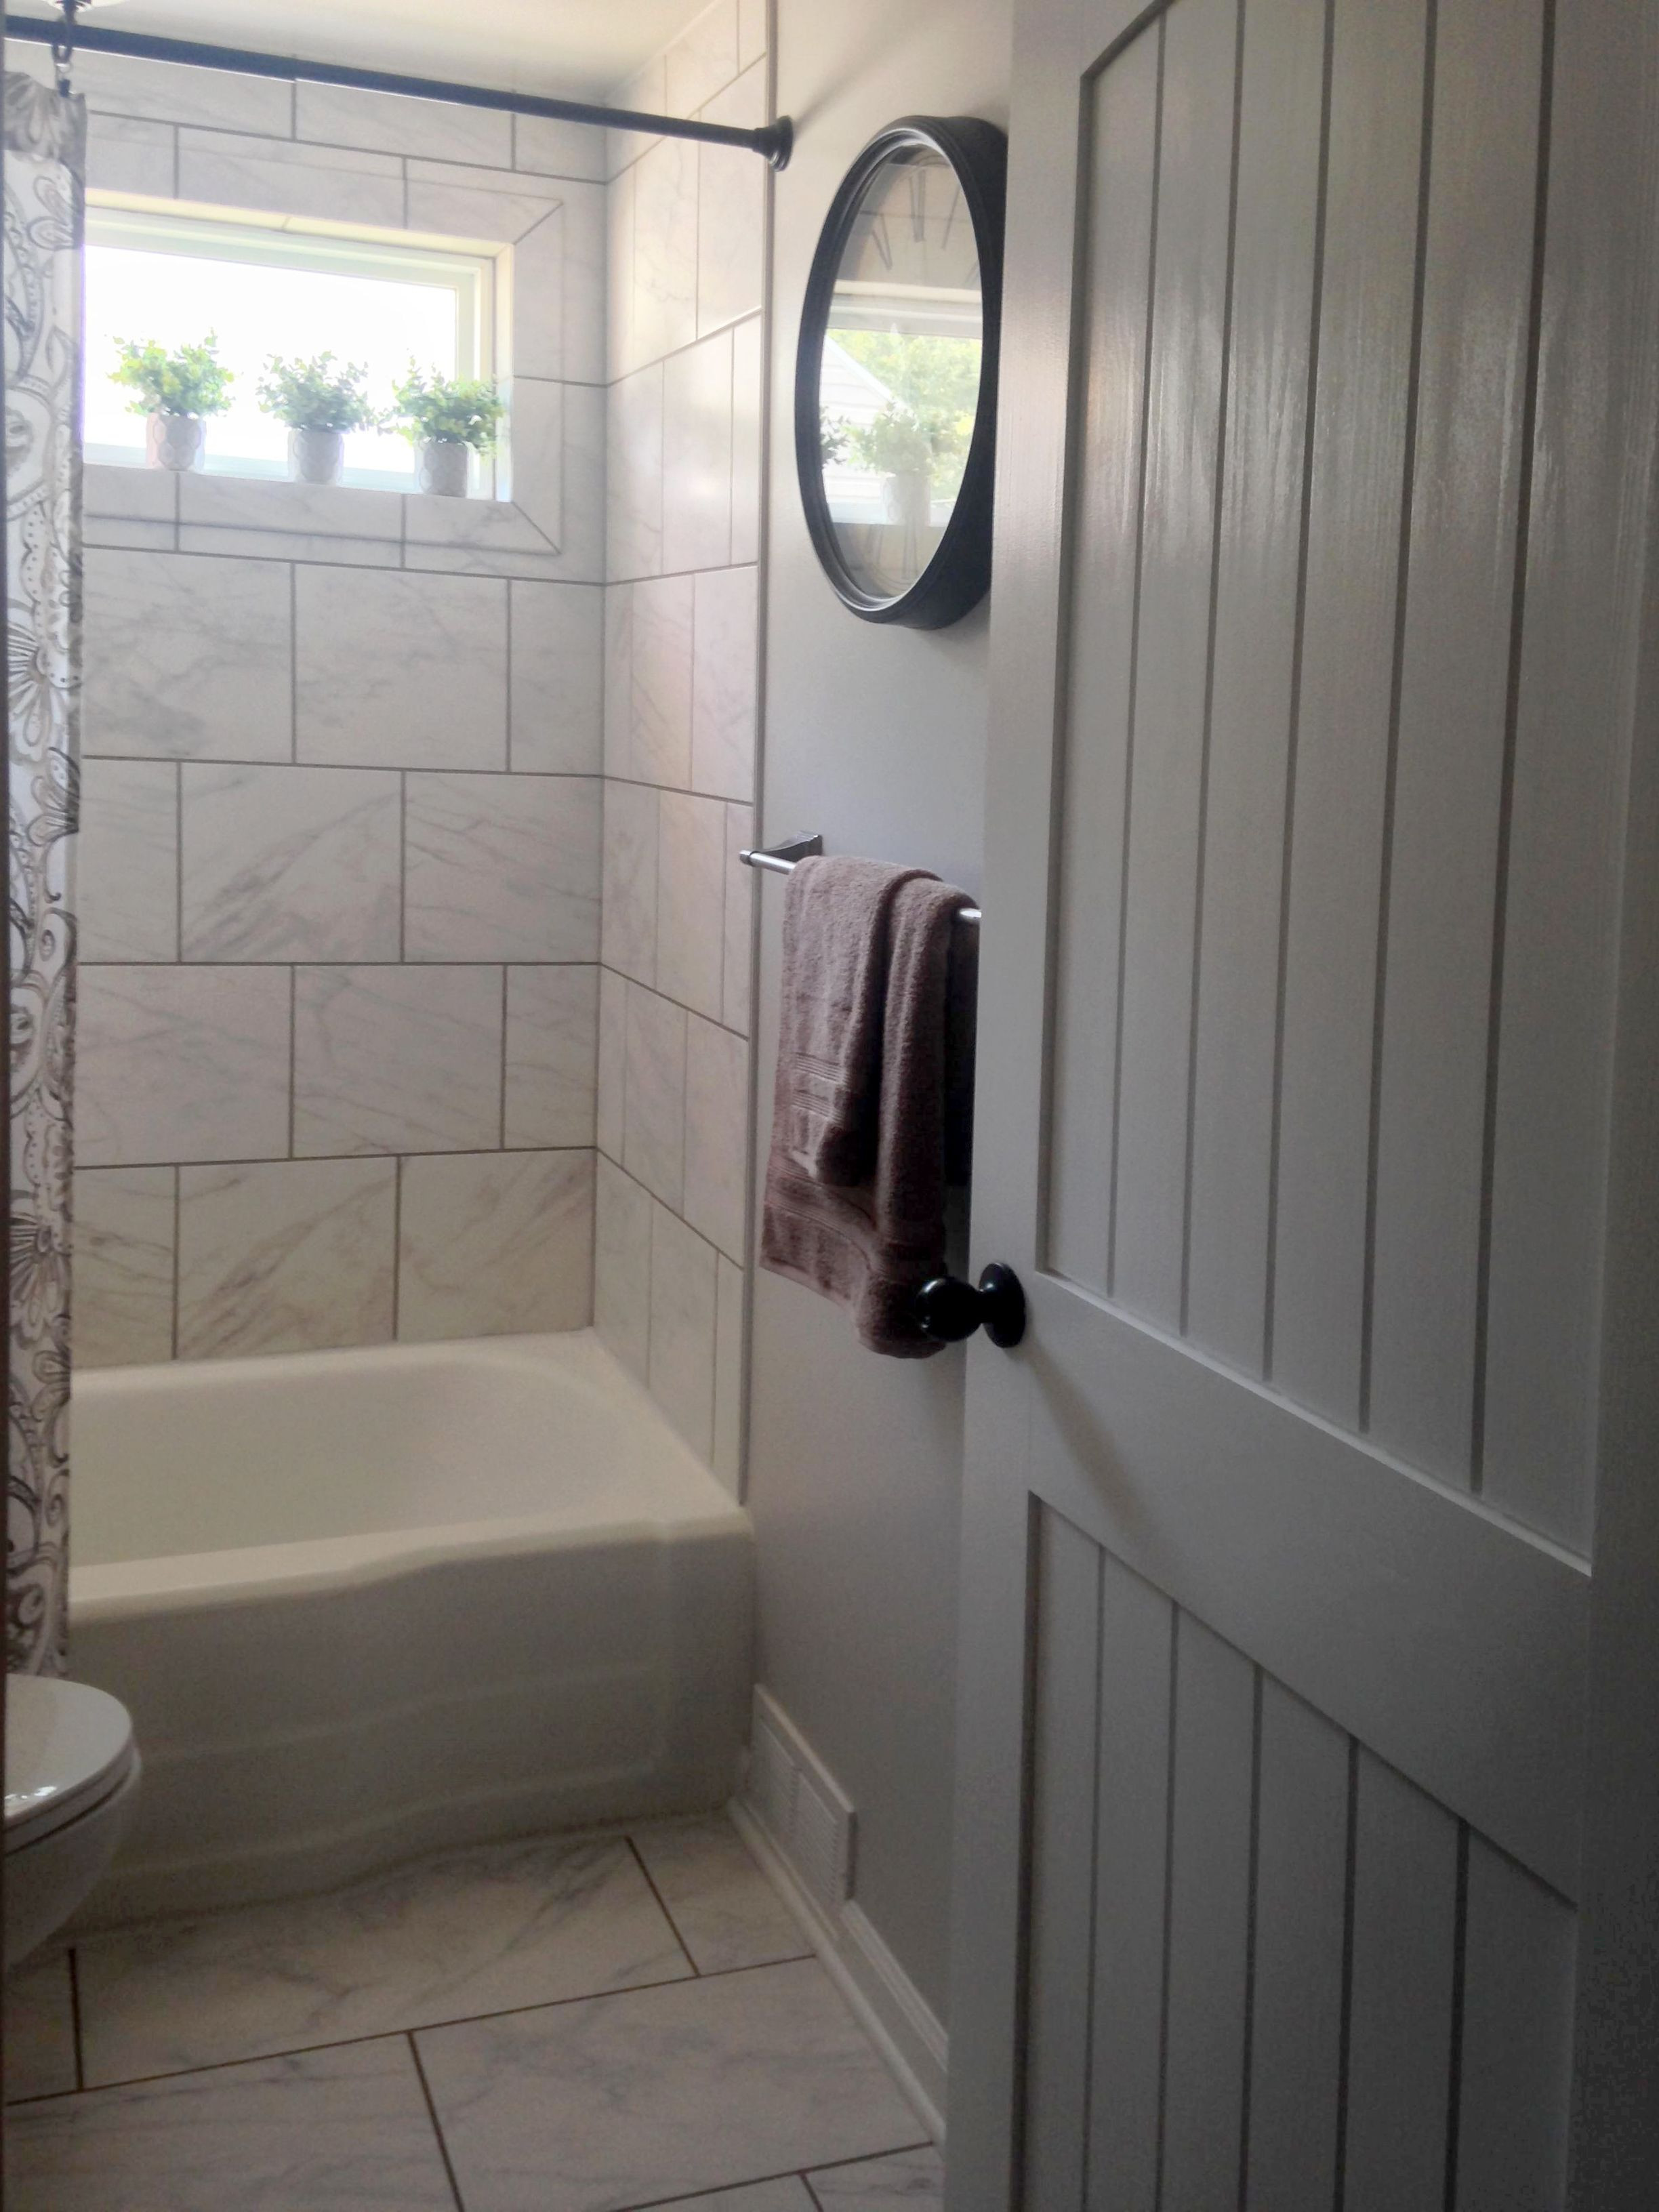 16 Amazing Hardwood Flooring Erie Pa 2024 free download hardwood flooring erie pa of bathroom remodel by michelle g of erie pa i had my bathroom throughout bathroom remodel by michelle g of erie pa i had my bathroom gutted with the exception of t